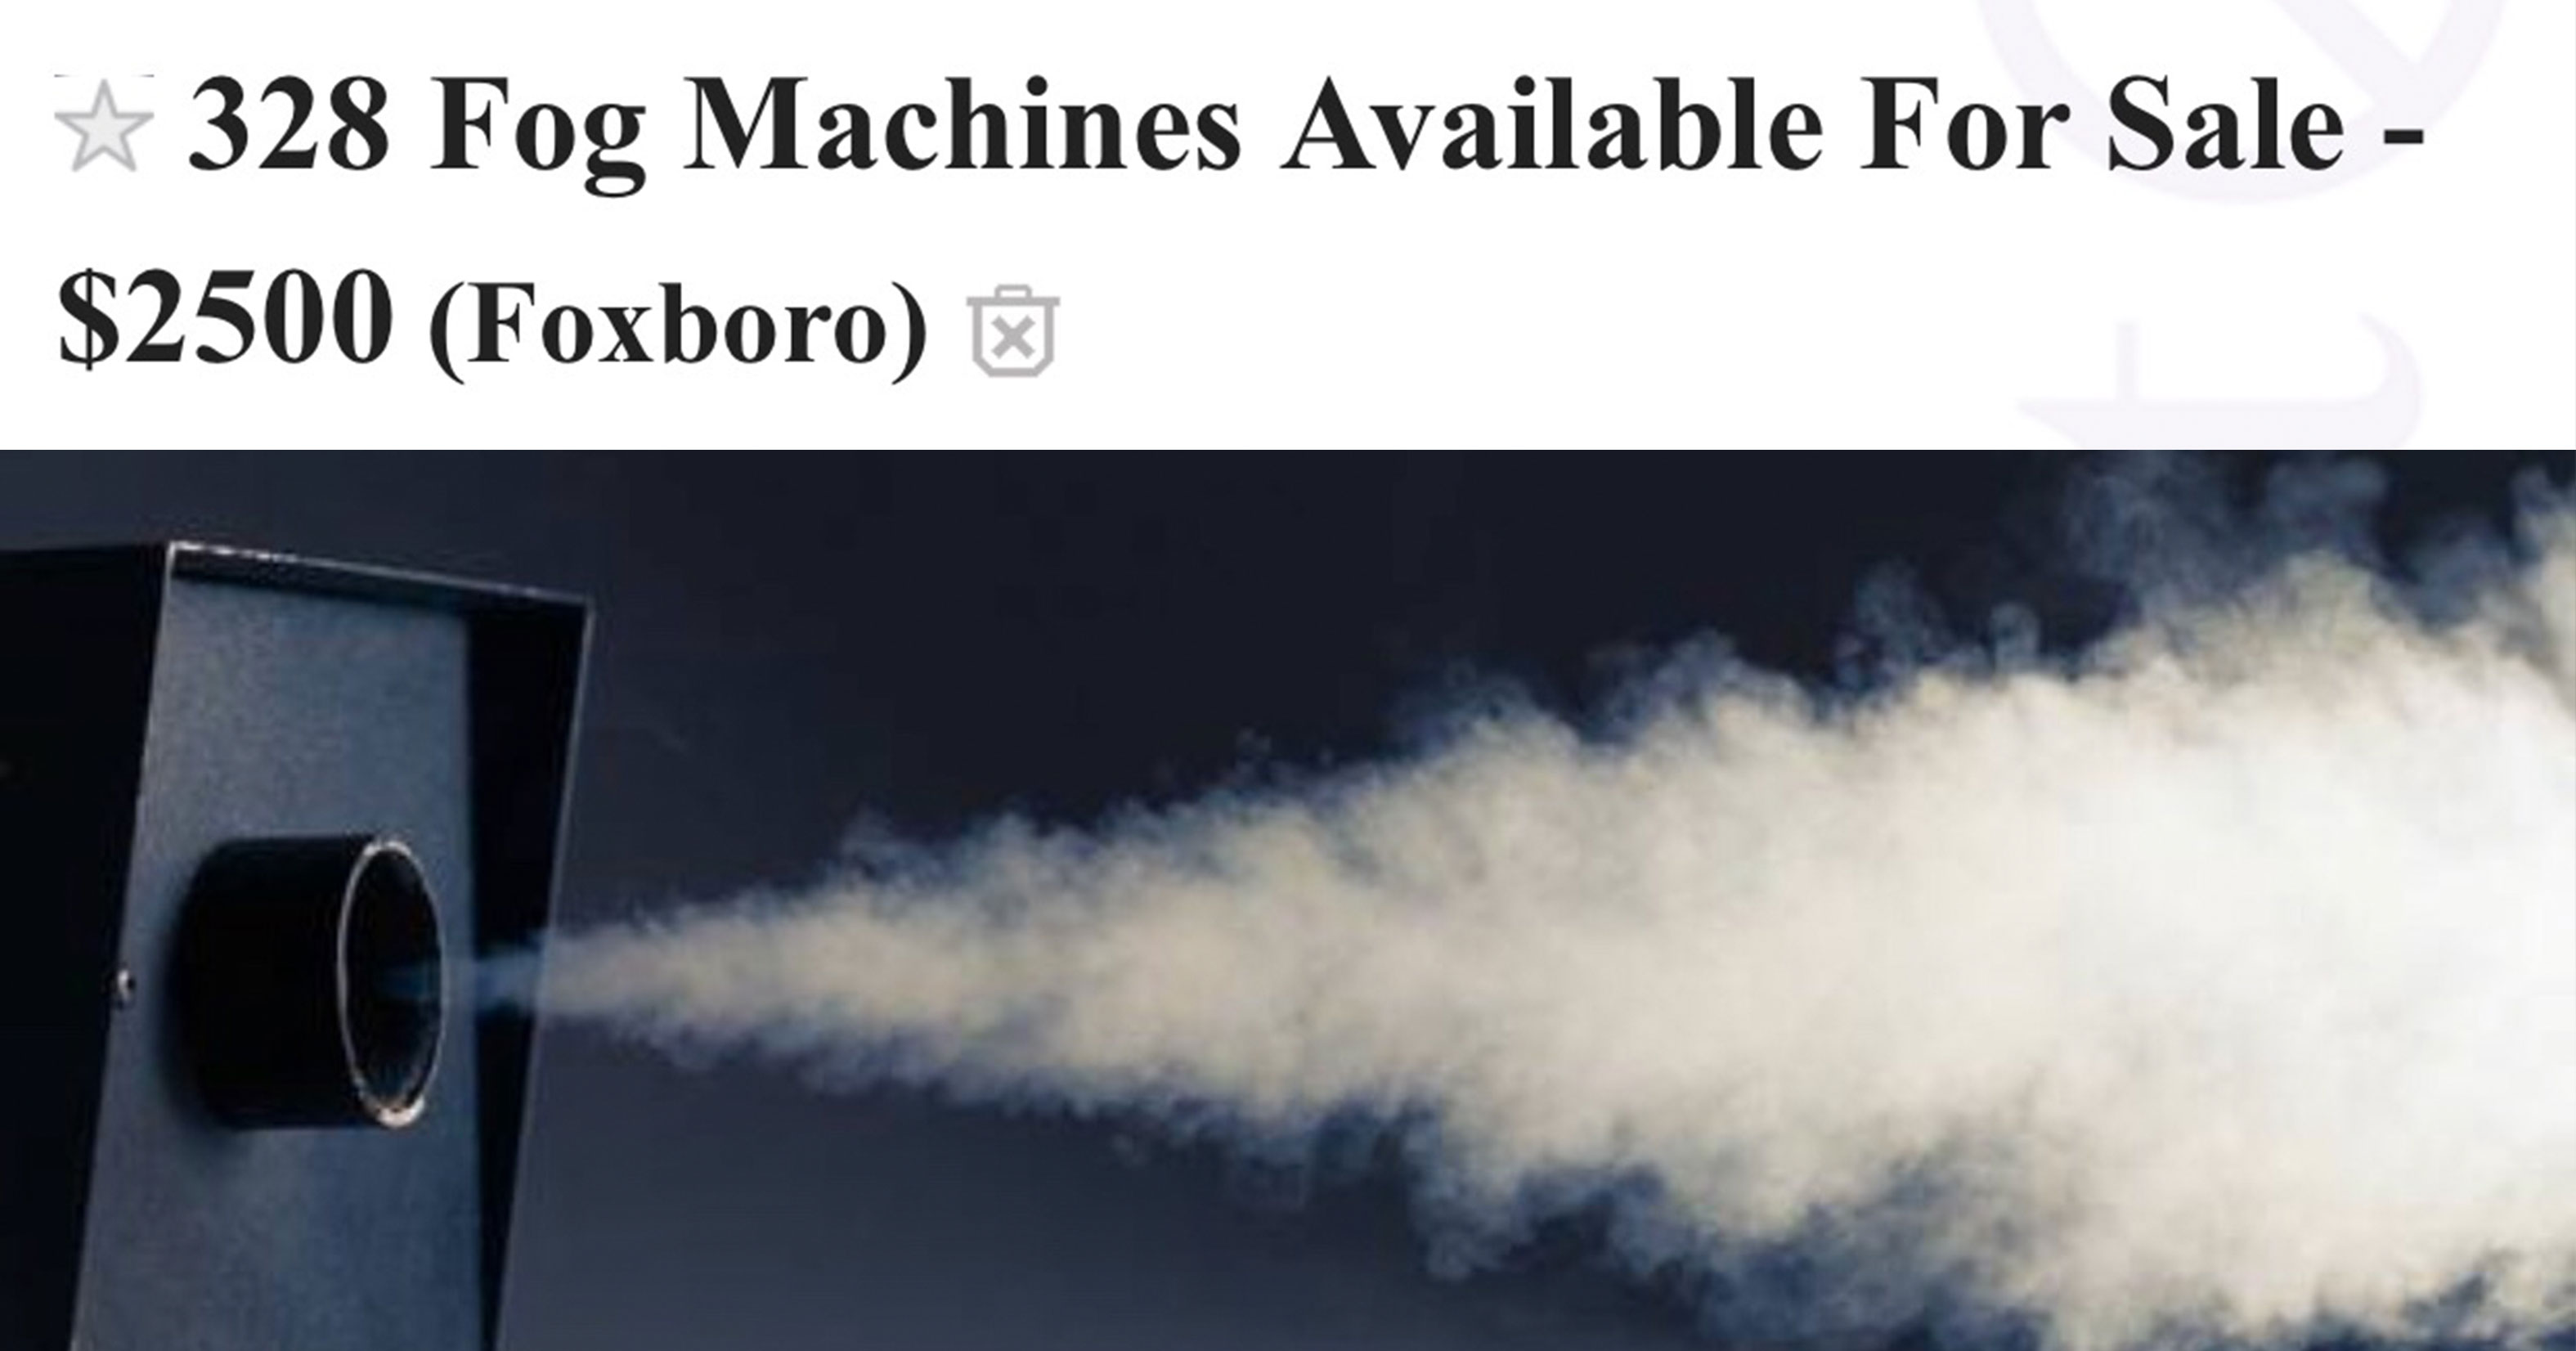 someone in boston is selling 328 fog machines on craigslist and the